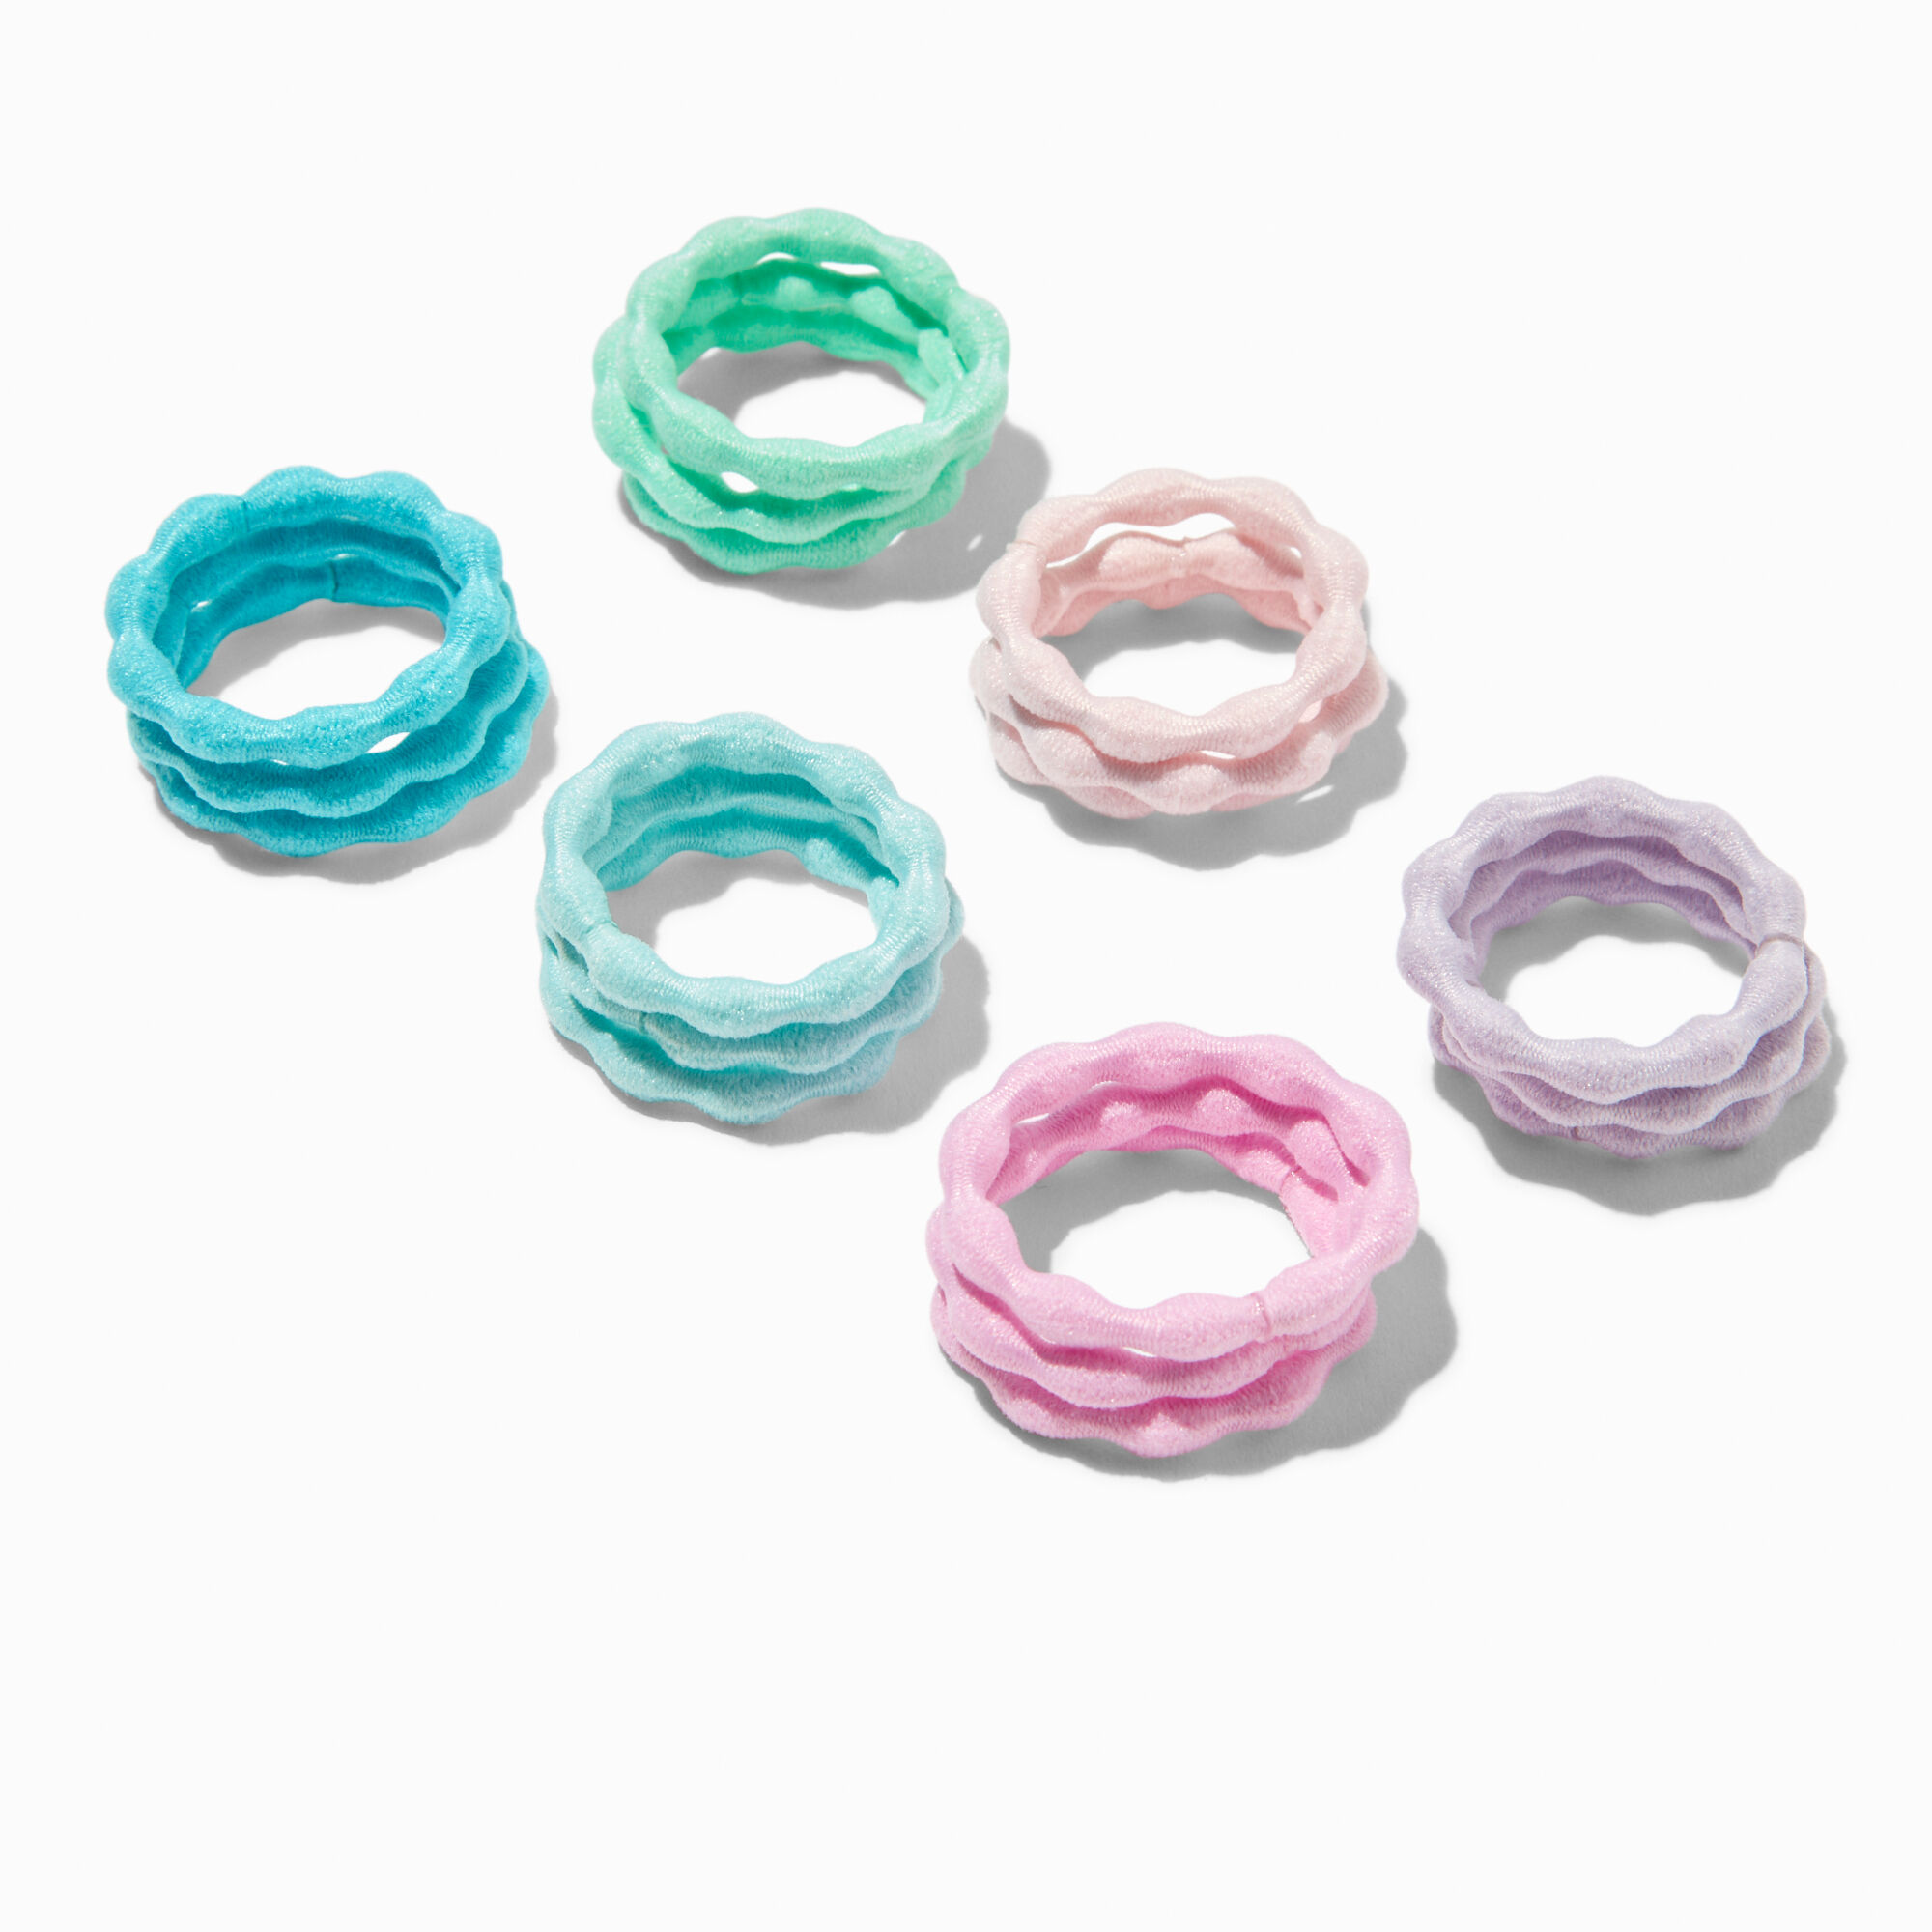 View Claires Club Mermaid Bubble Mini Hair Ties 18 Pack information